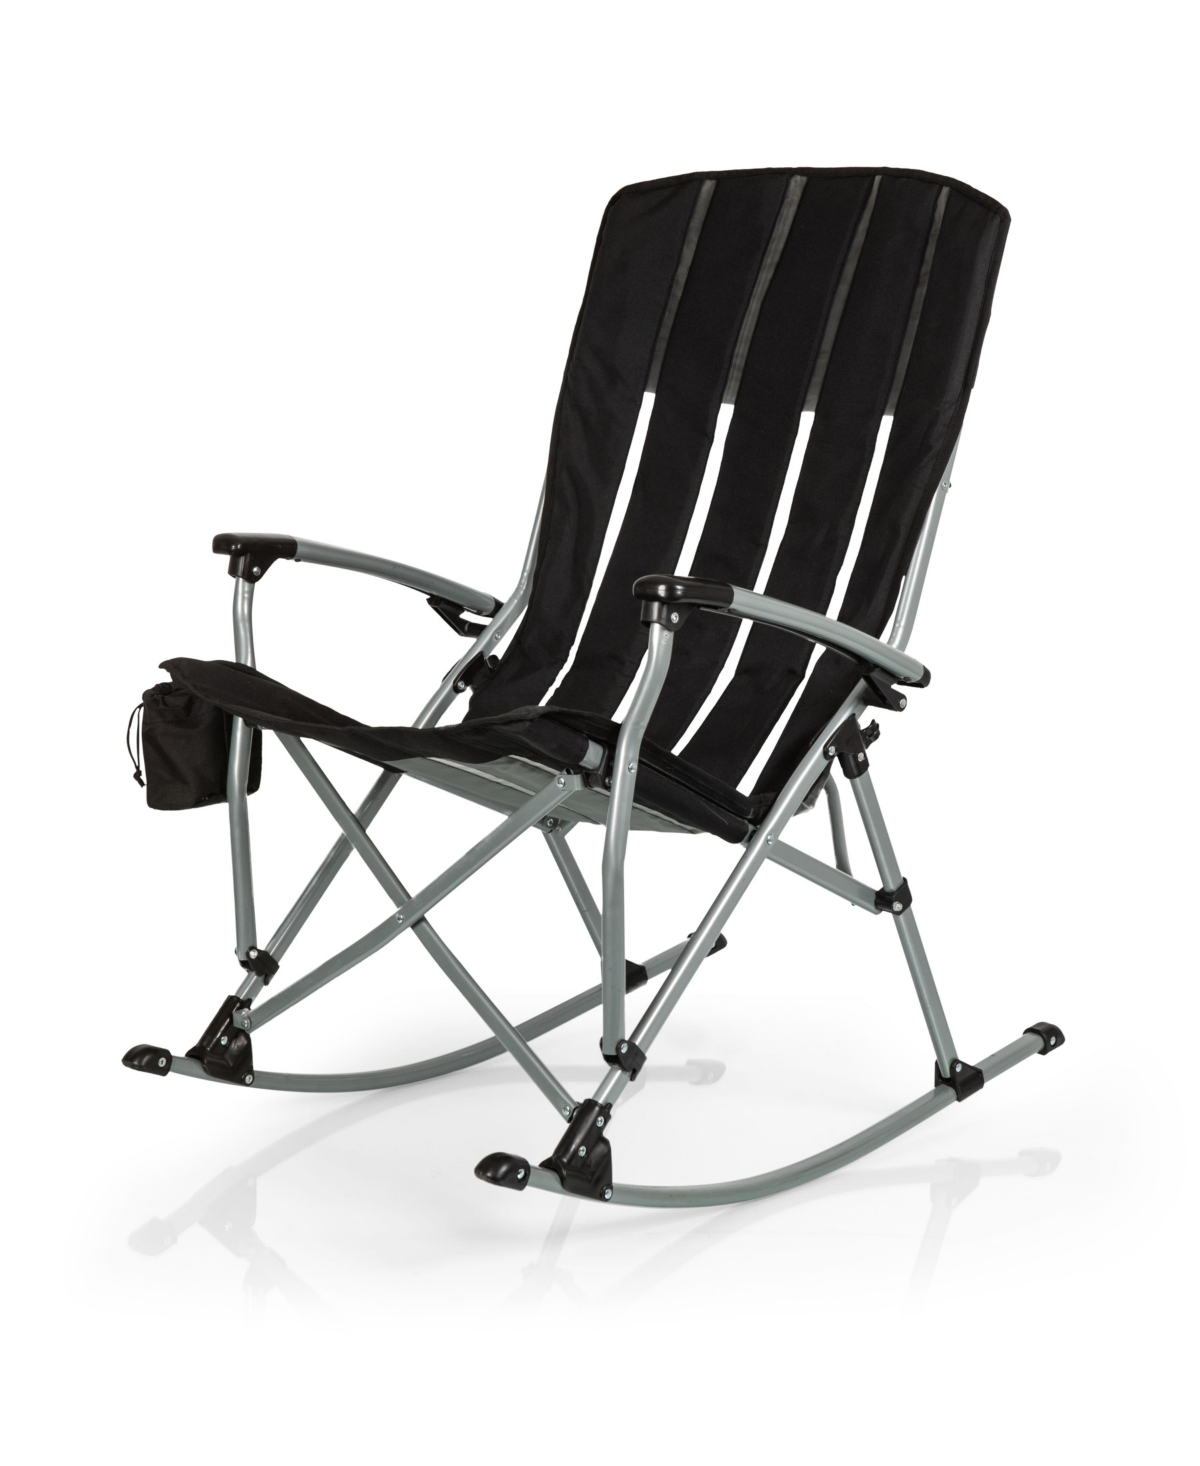 by Picnic Time Outdoor Rocking Camp Chair - Black